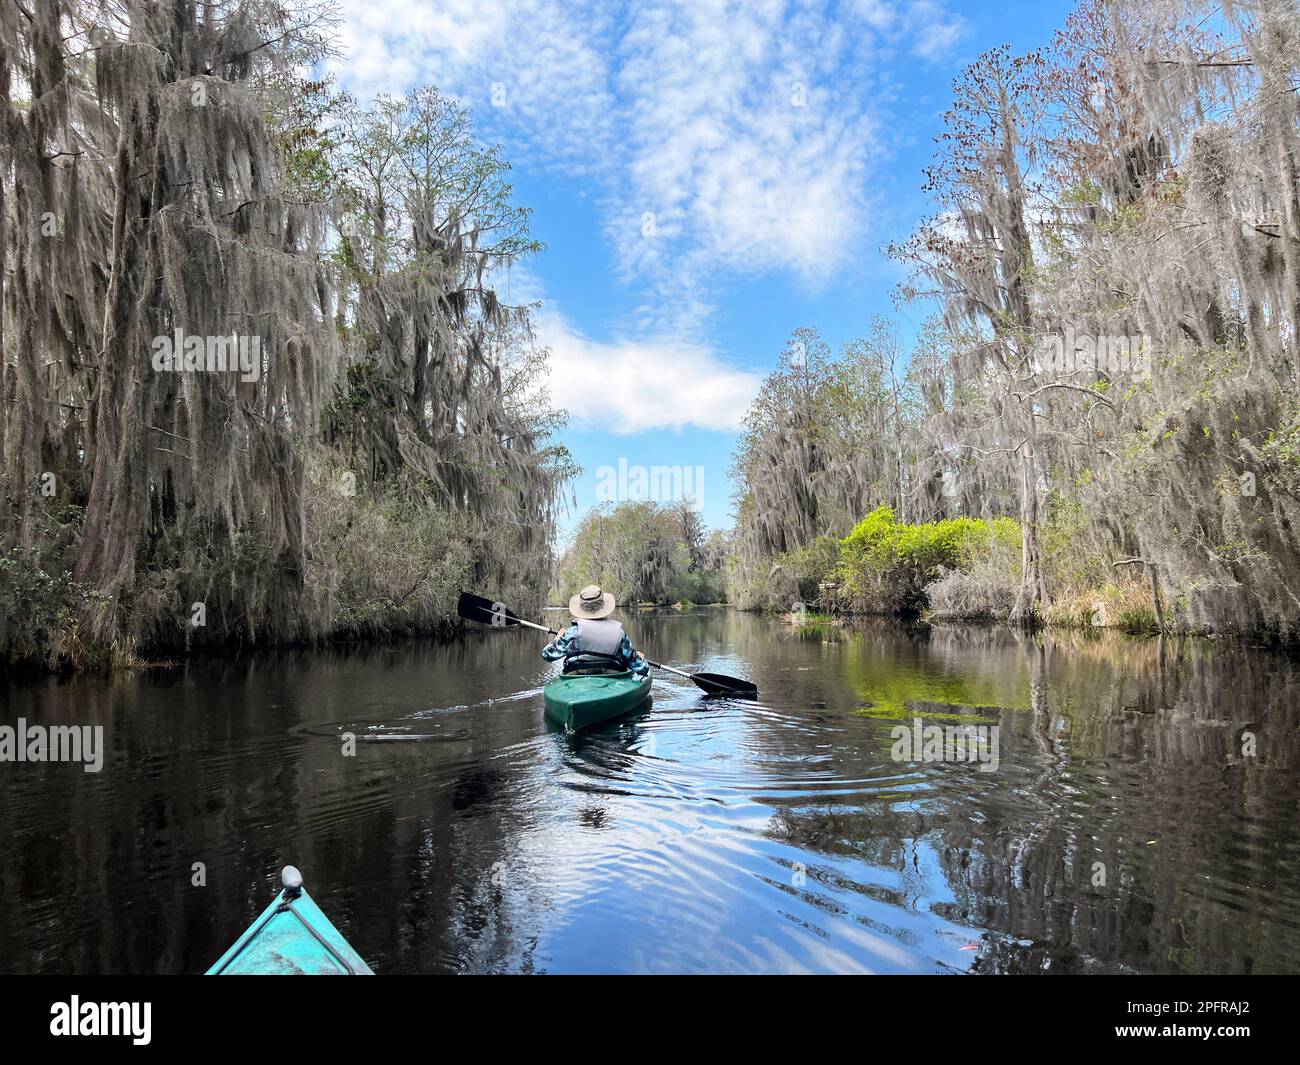 An active senior couple paddles Okefenokee National Wildlife Refuge, North America's largest blackwater swamp and home to thousands of alligators. Stock Photo